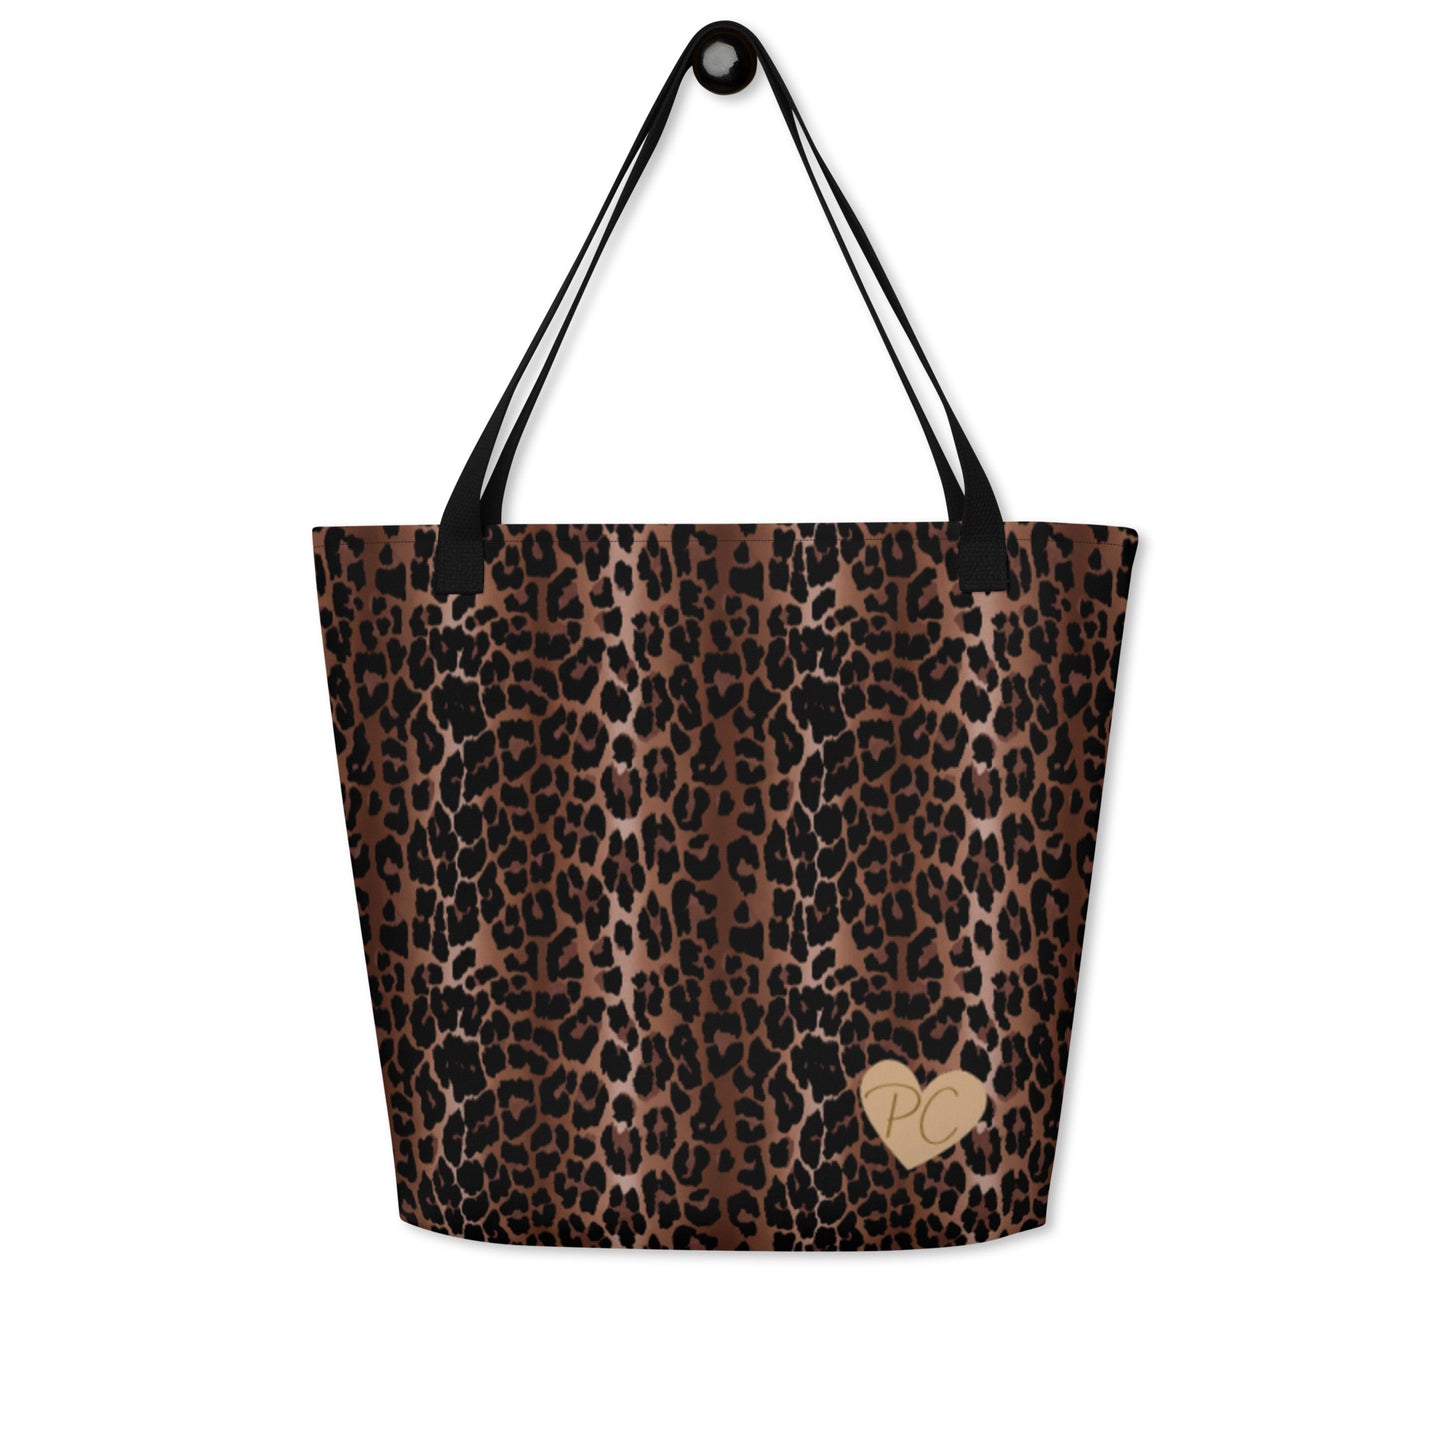 Bethany Large Shopper Tote Bag in OG Leopard Print | Pinup Couture Relaxed